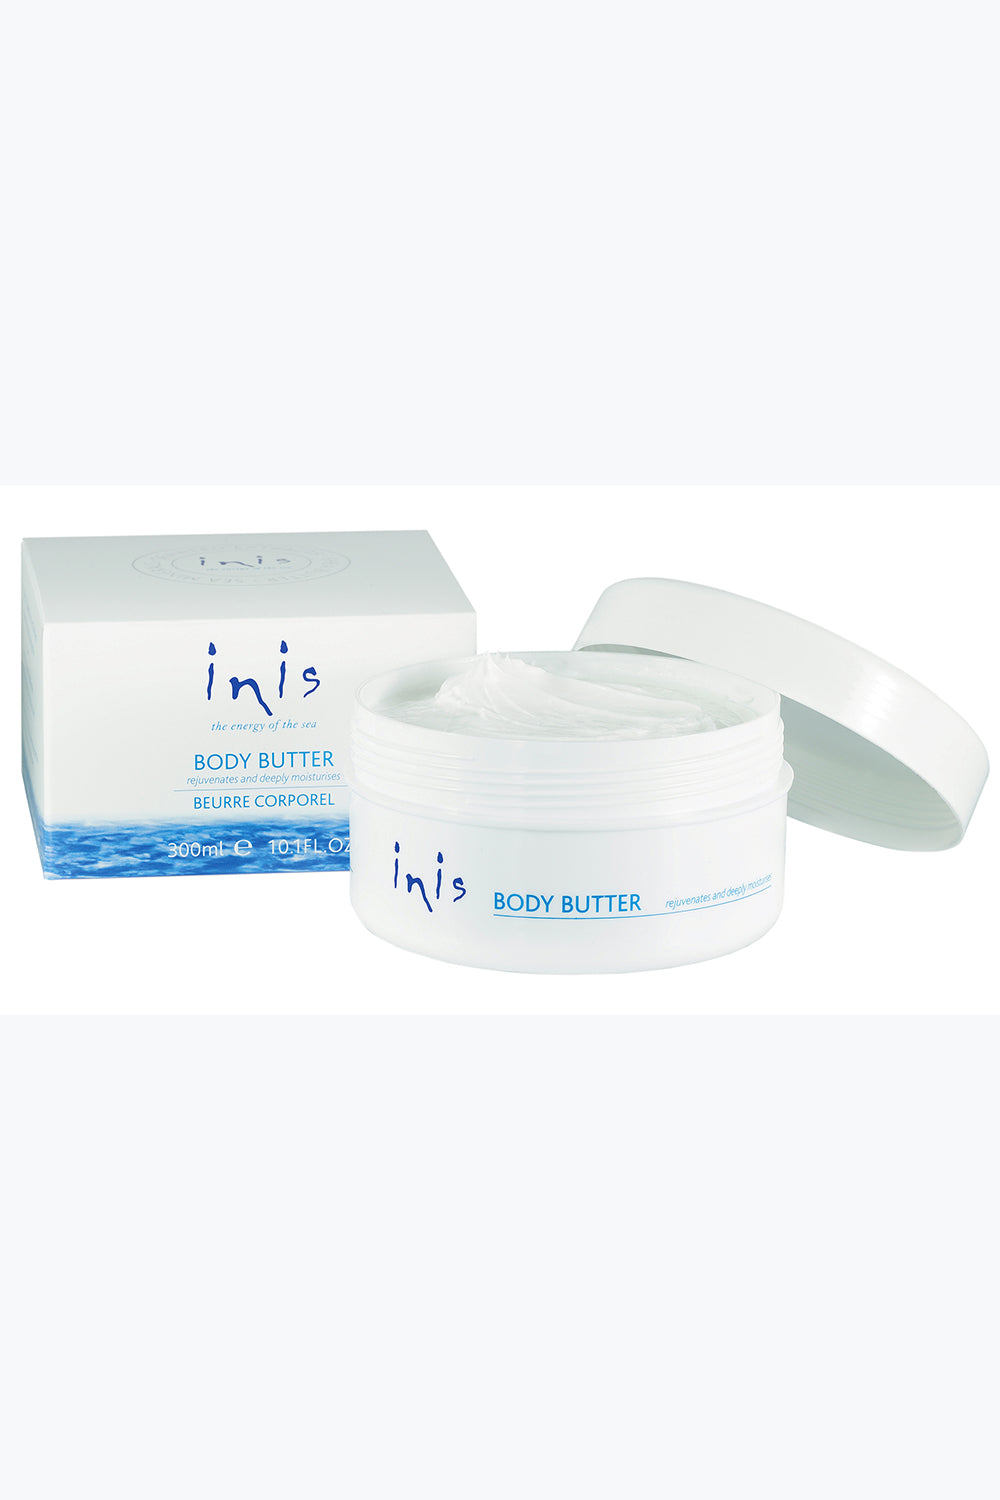 Inis "Energy of the Sea" Body Butter